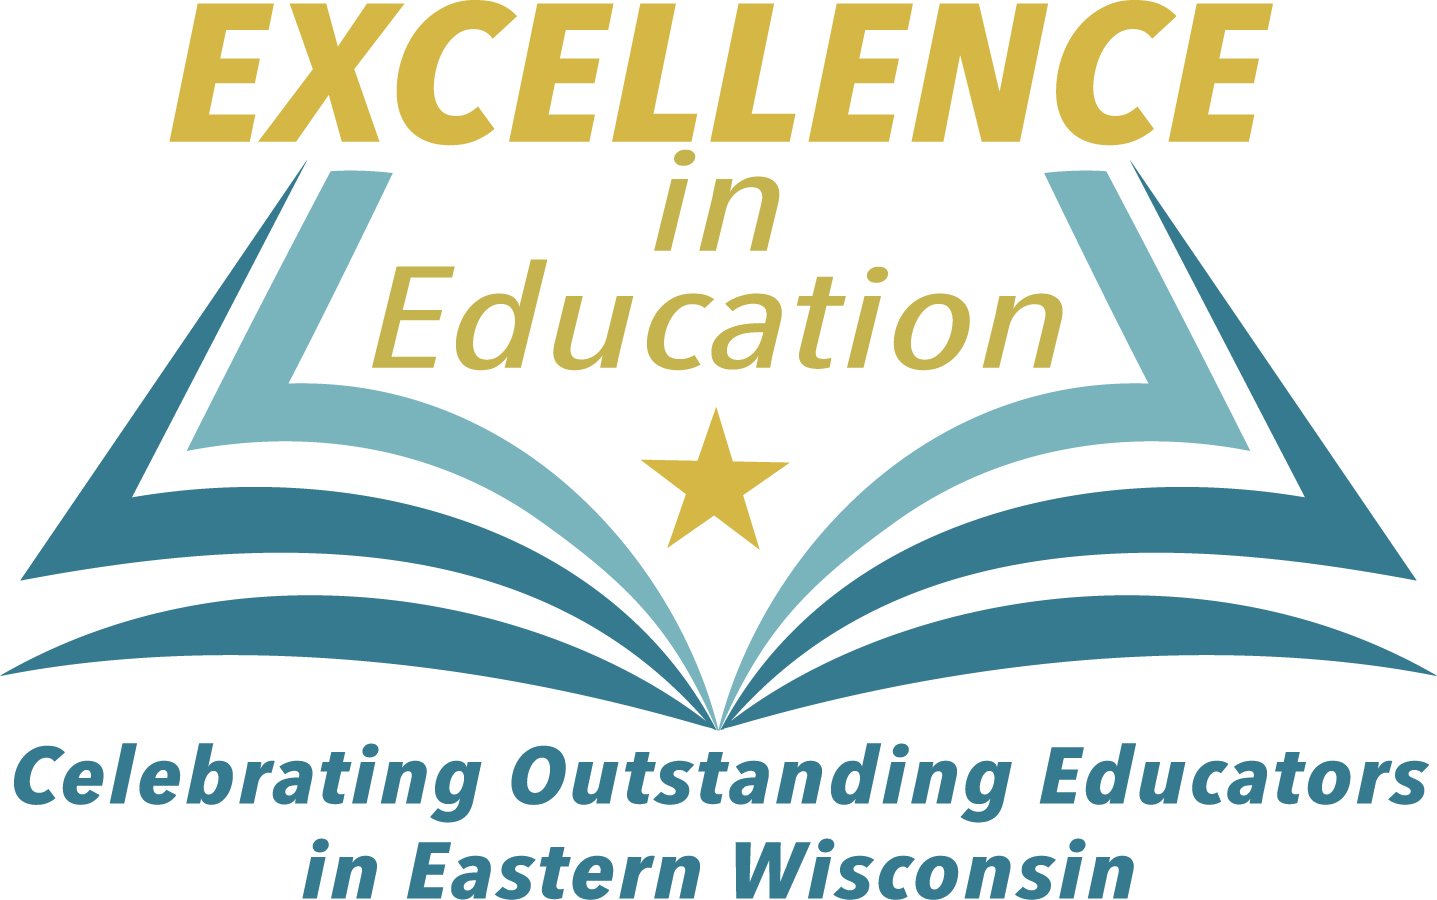 Public invited to nominate “exceptional” school employee for new awards program